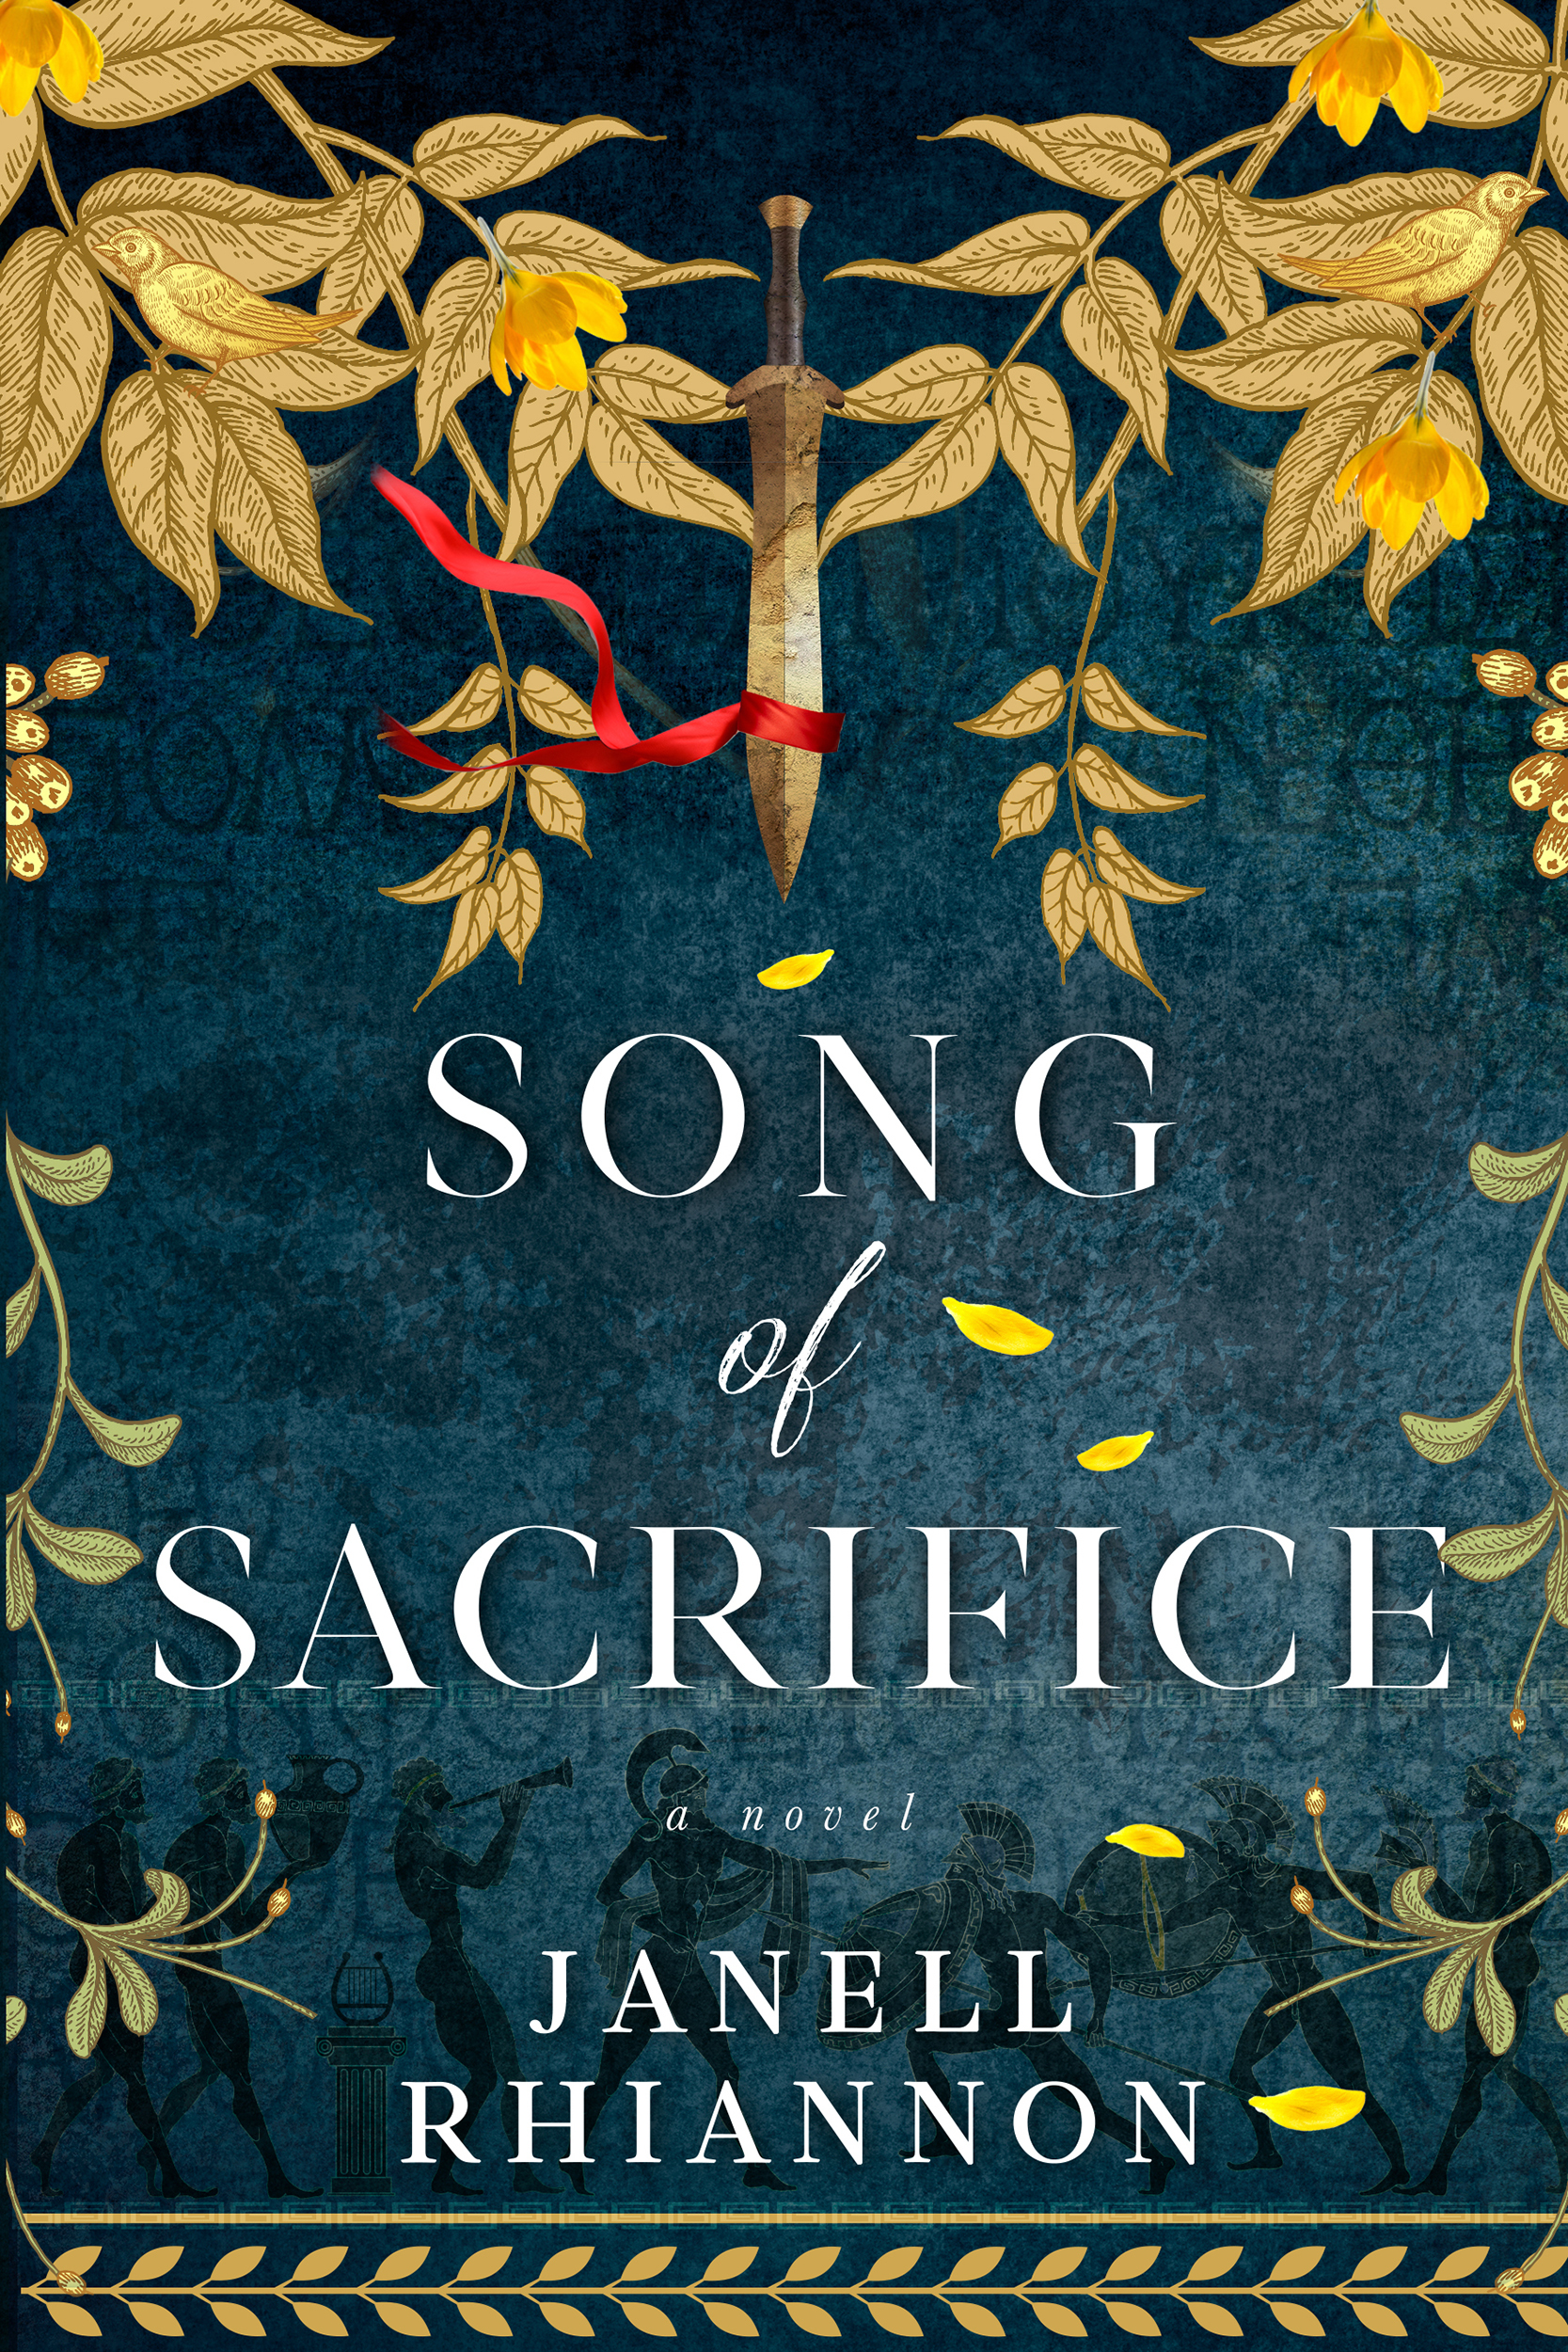 Song of Sacrifice by Janell Rhiannon